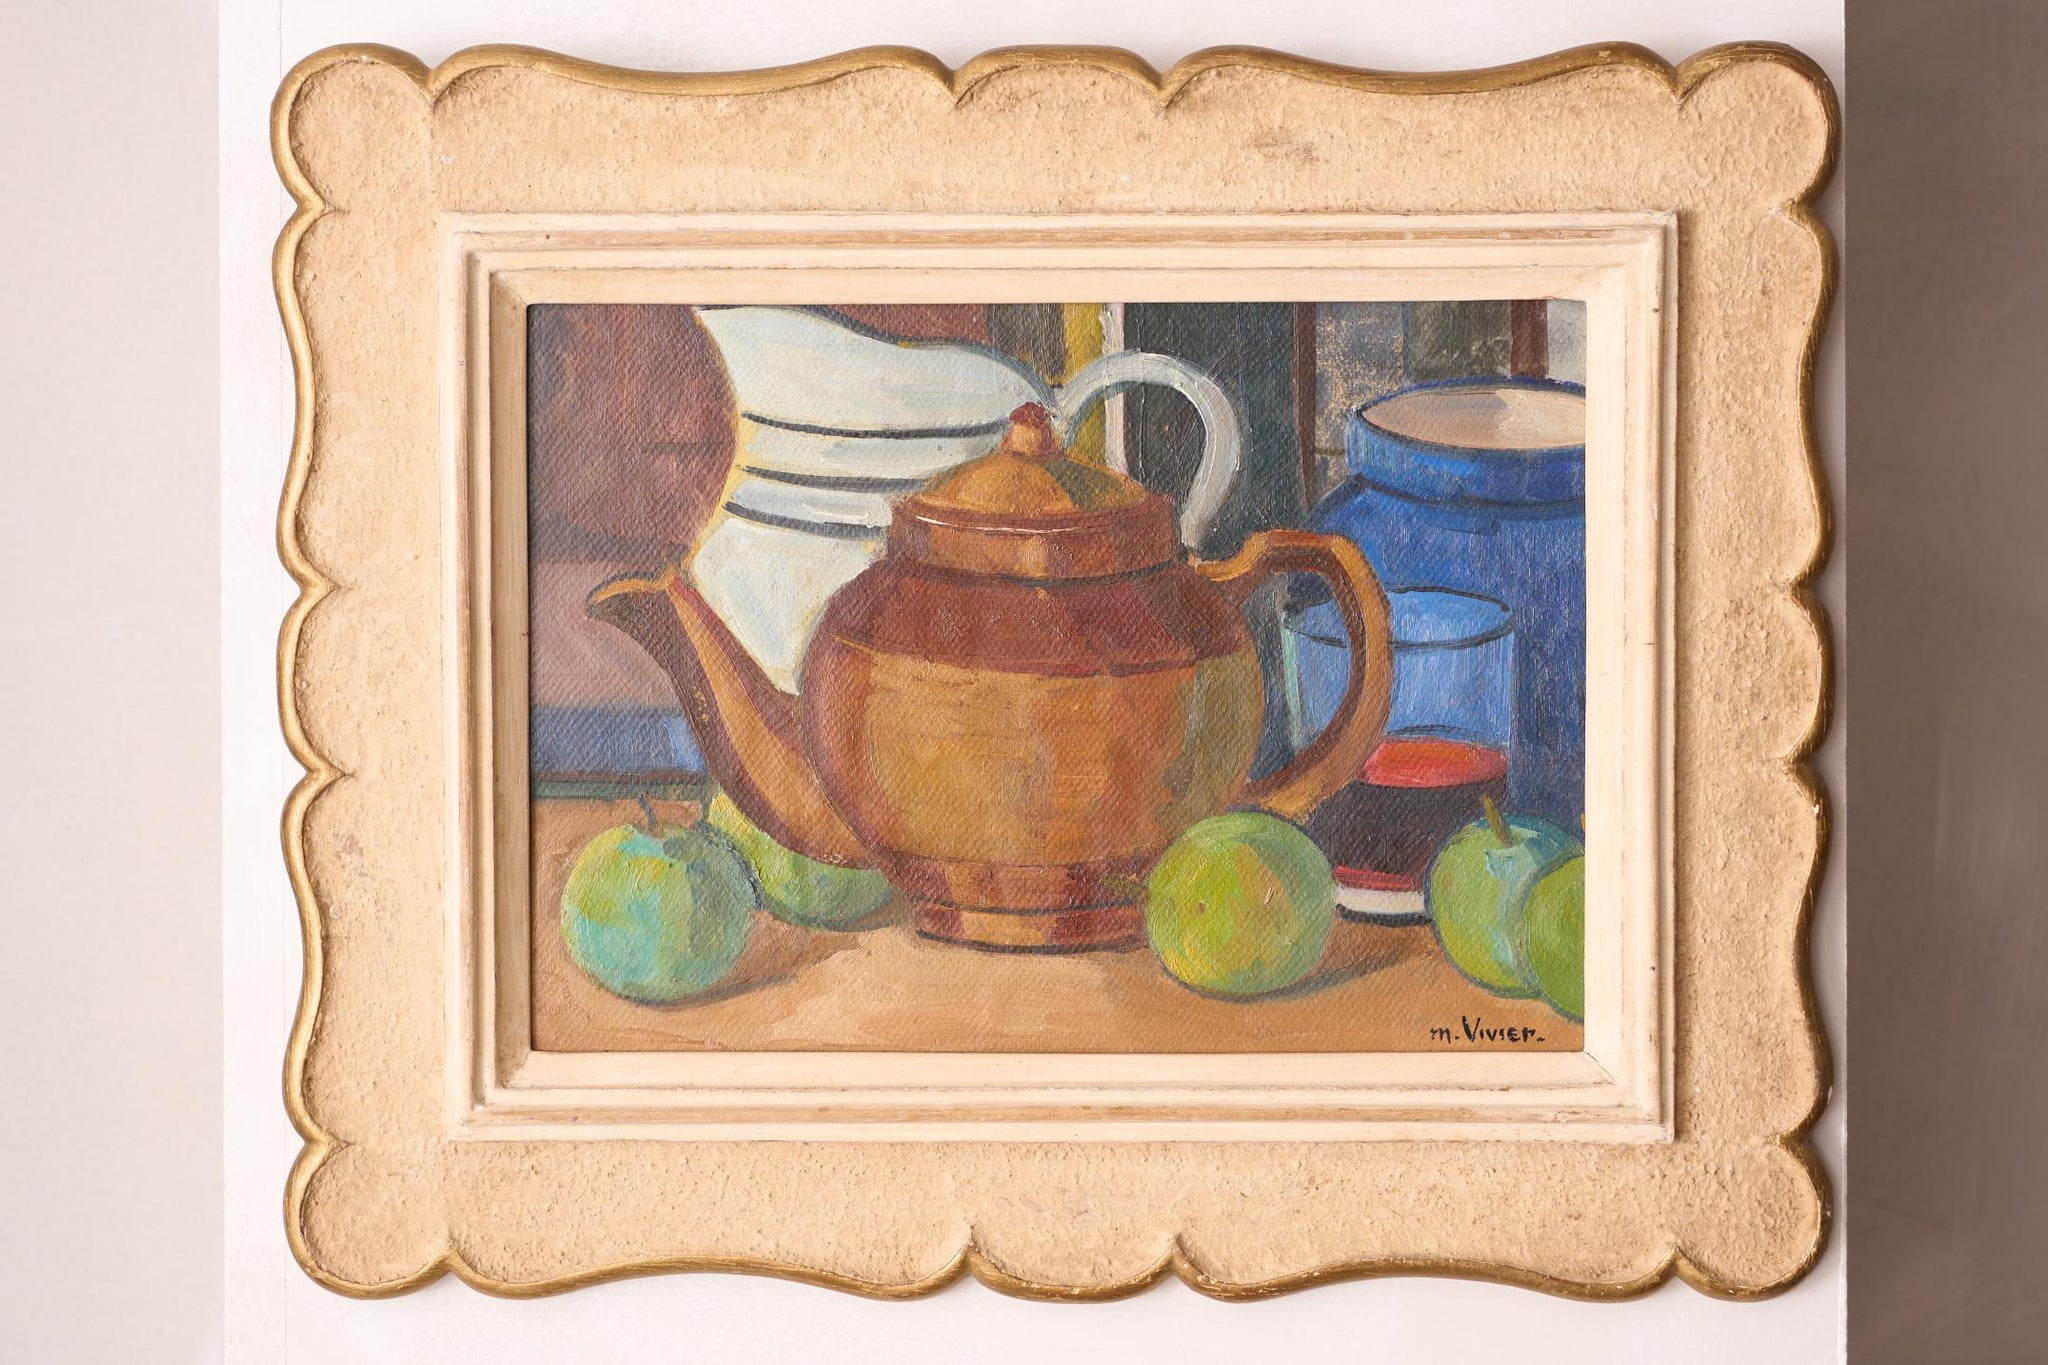 20th century painting on board of a teapot - M Vivier